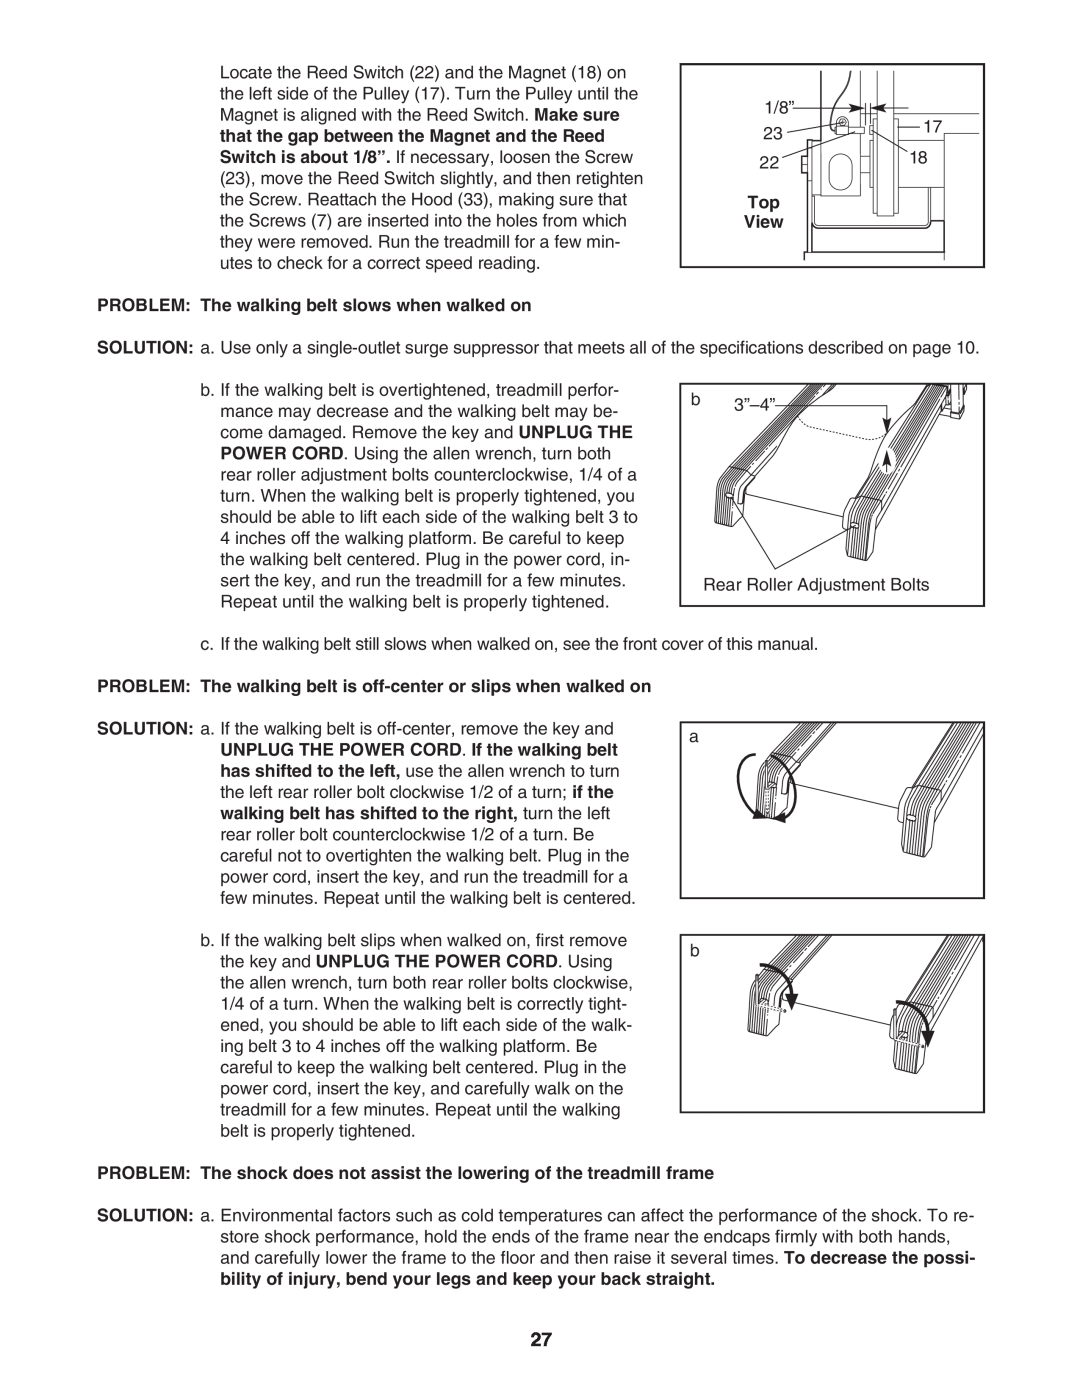 NordicTrack NTL1095.3 user manual PROBLEM The walking belt slows when walked on, View 